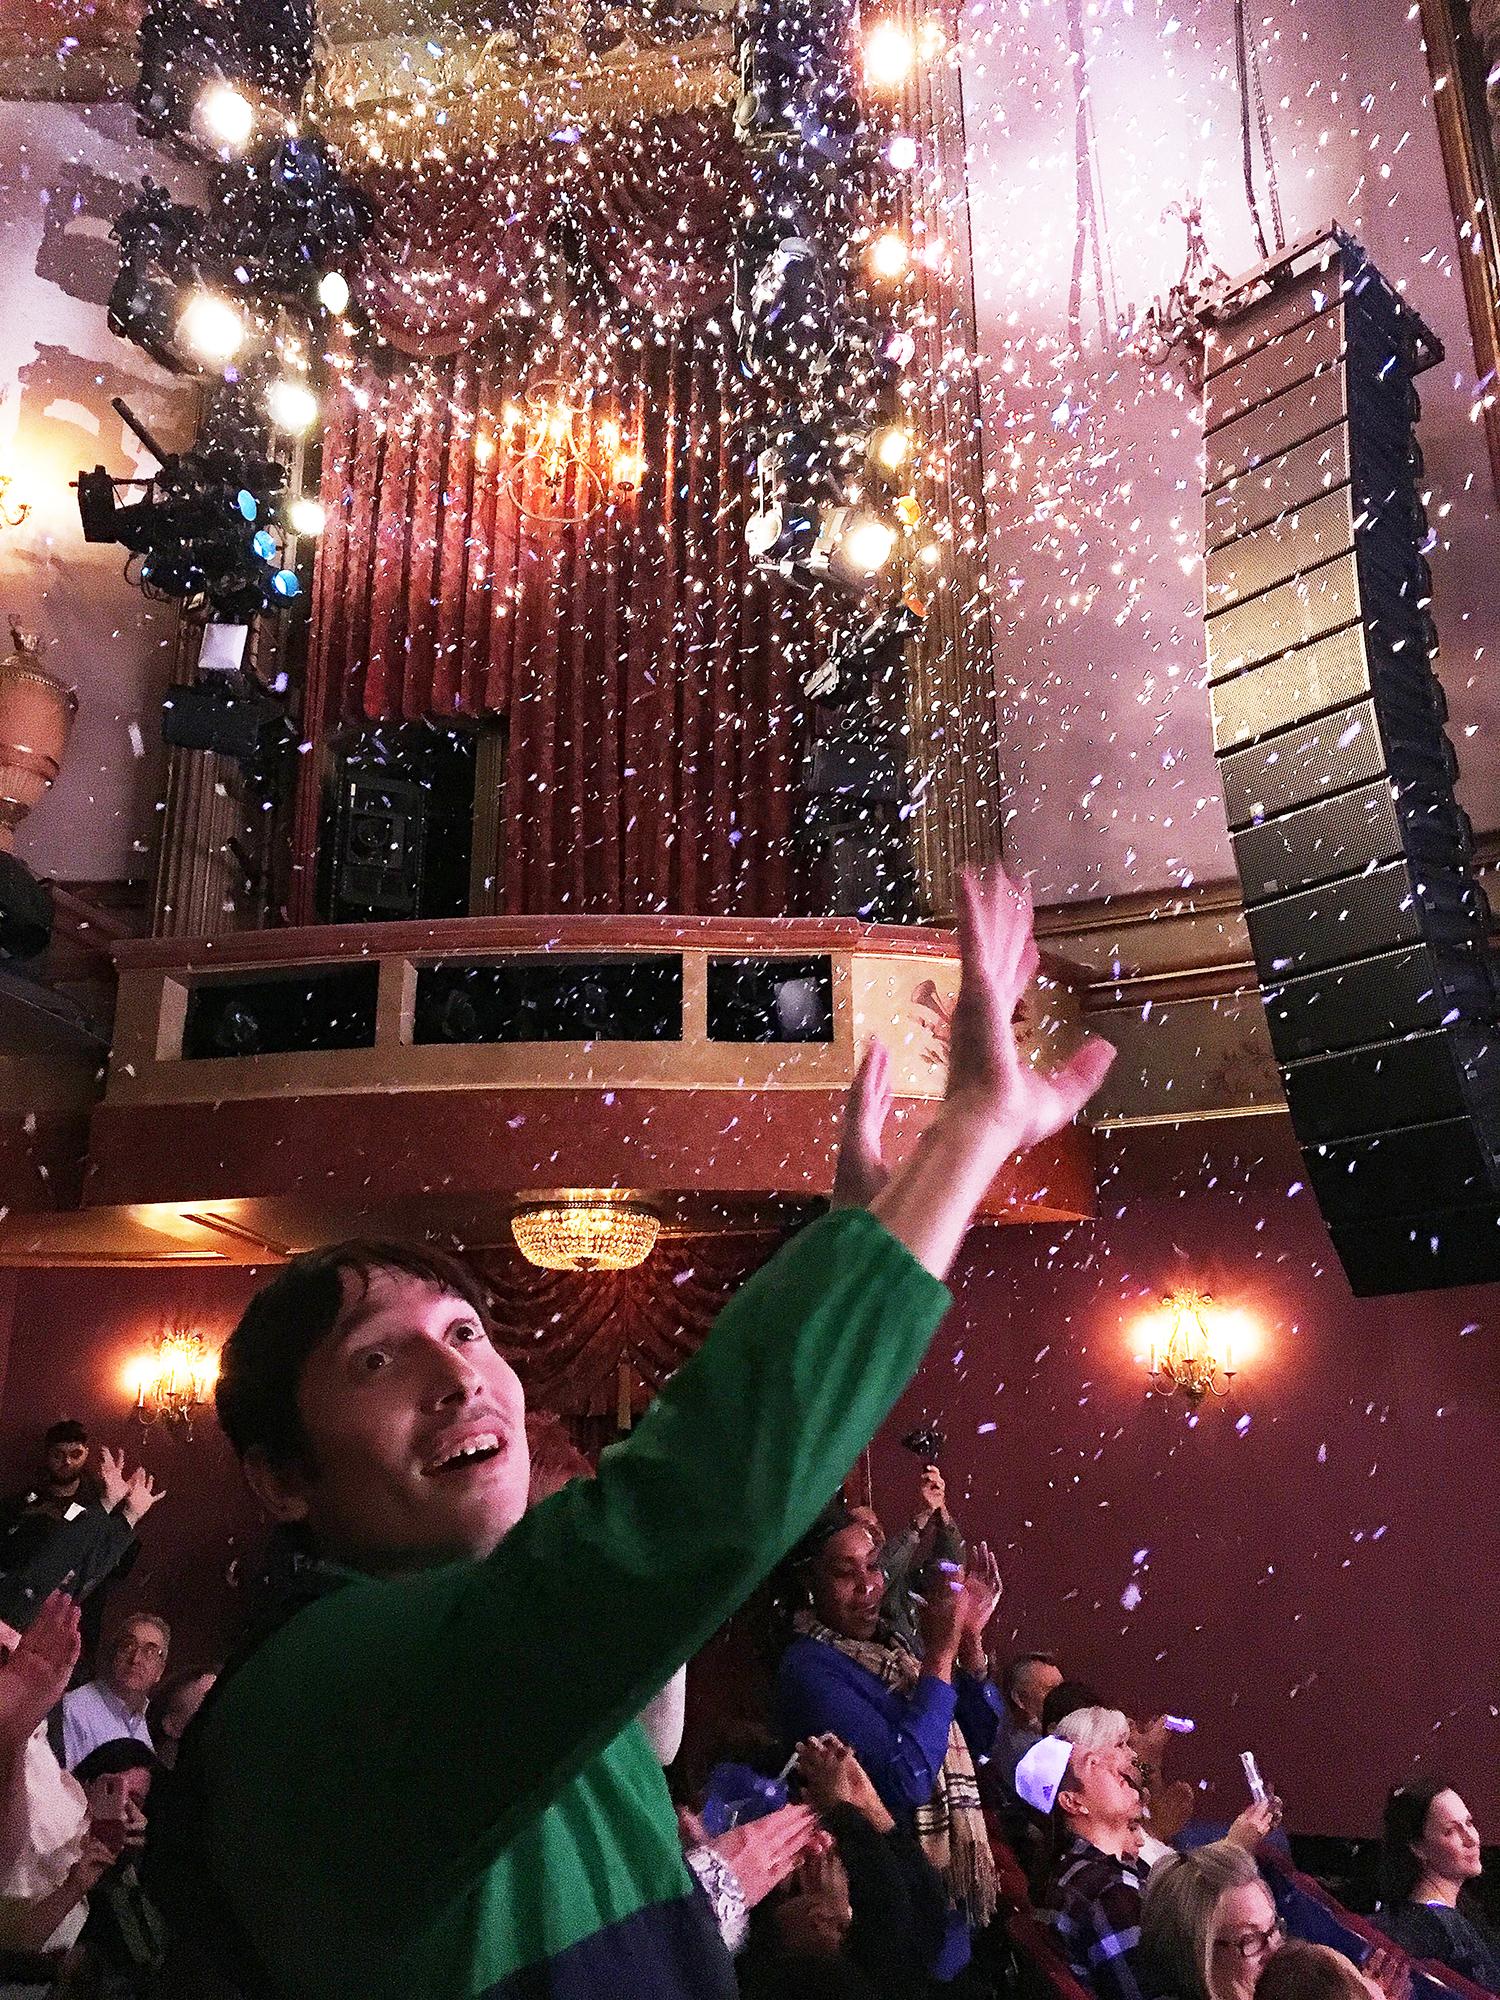 An audience member reaches for the confetti at the close of the show.